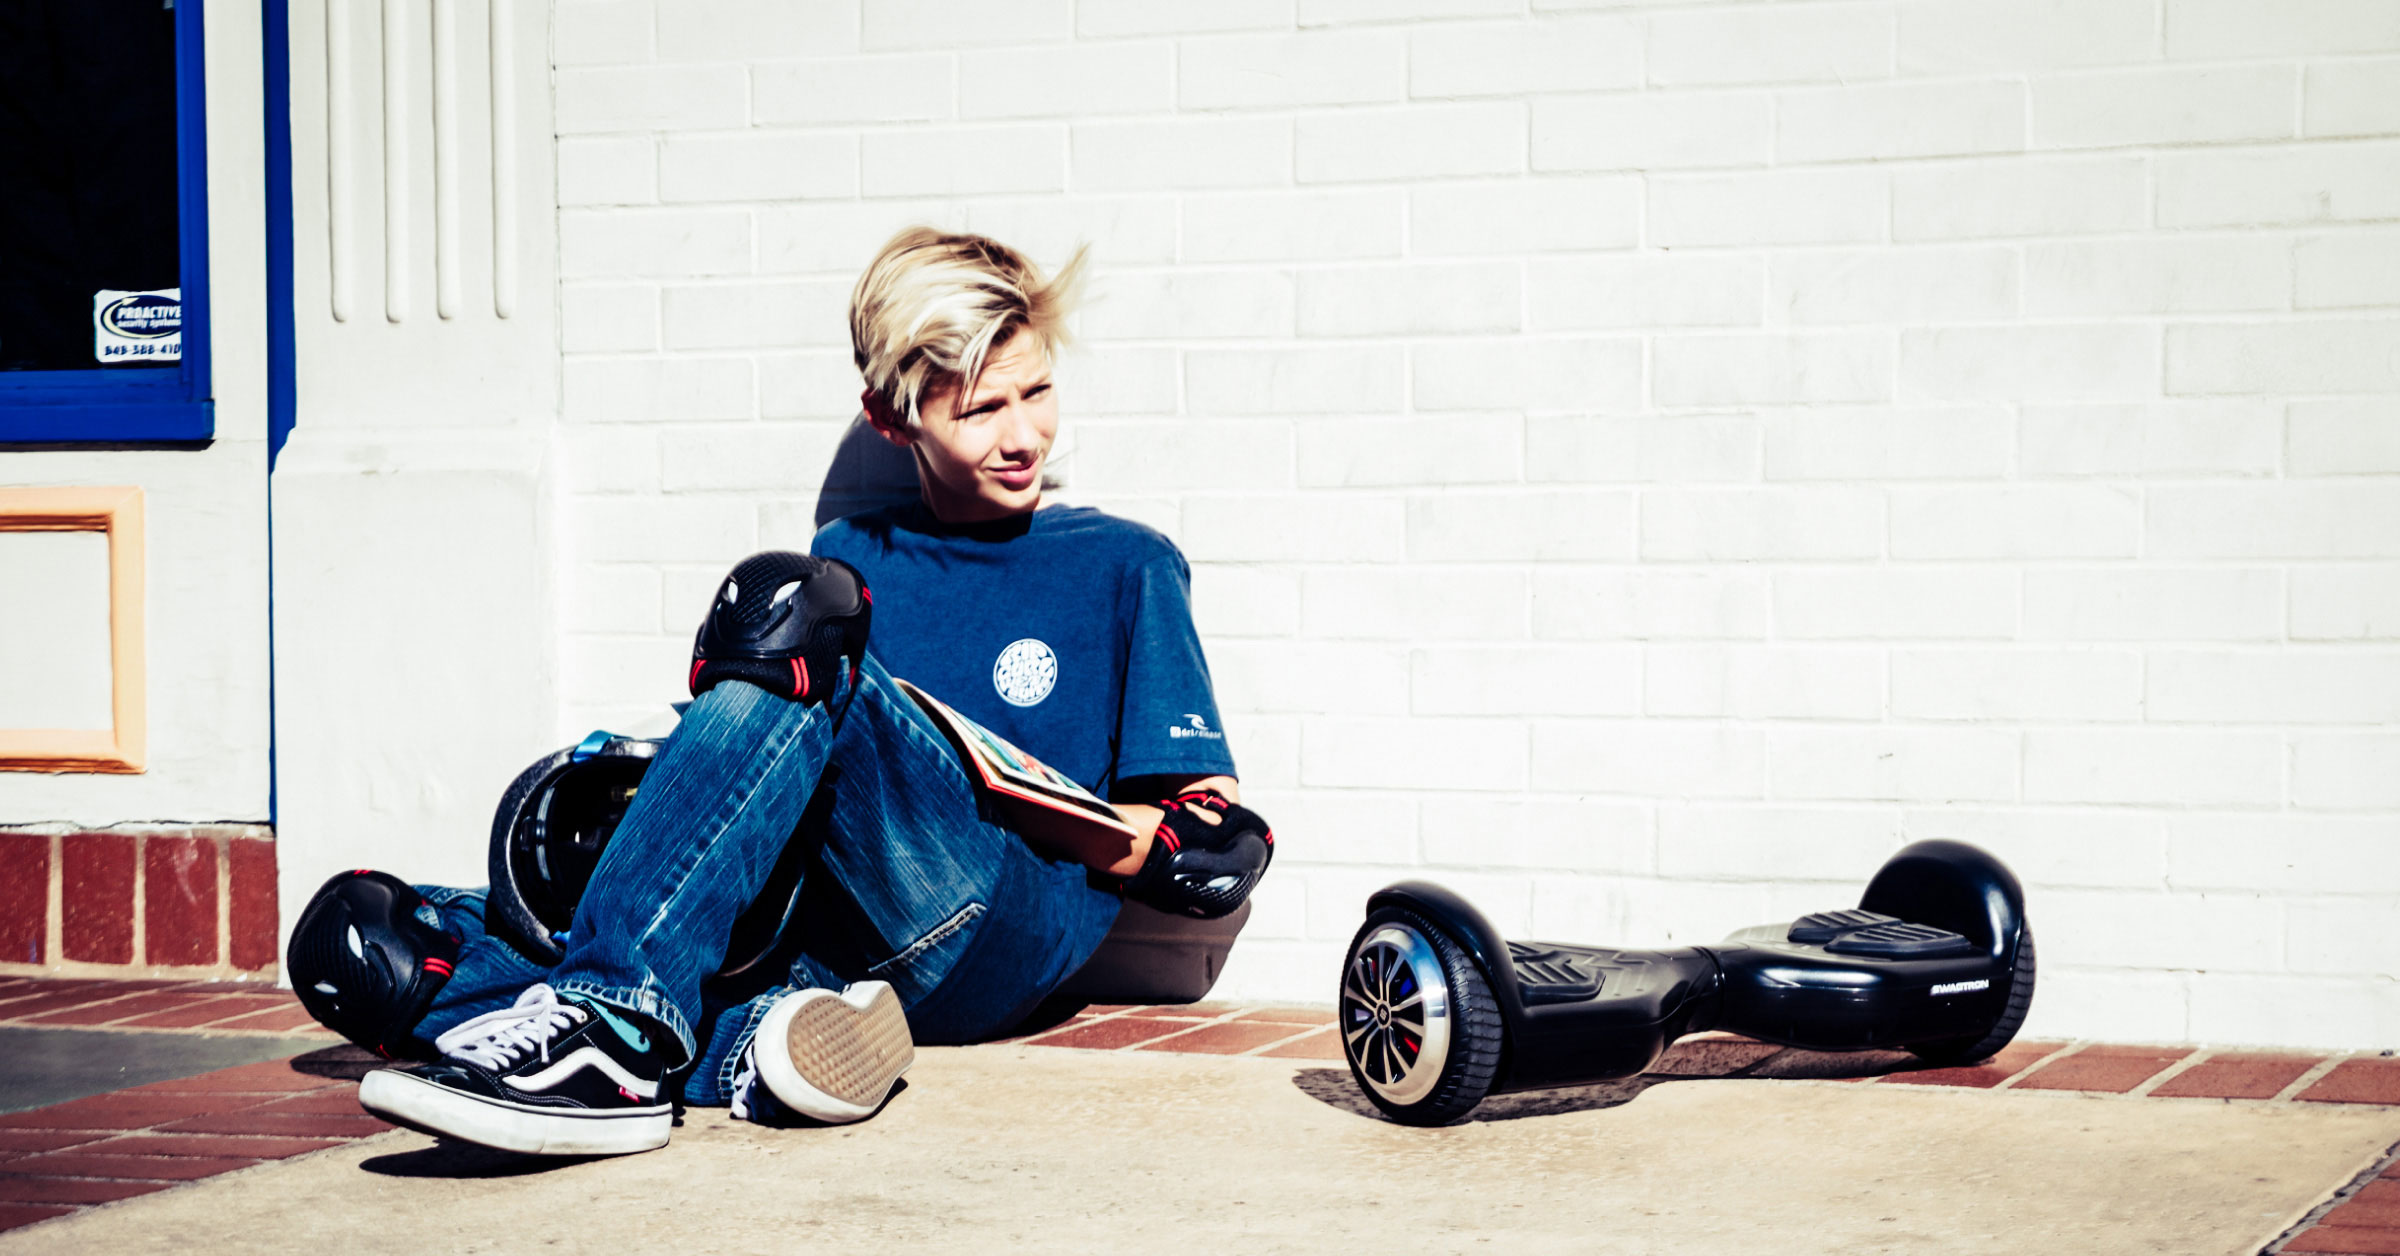 Hoverboards: How Do They Work?